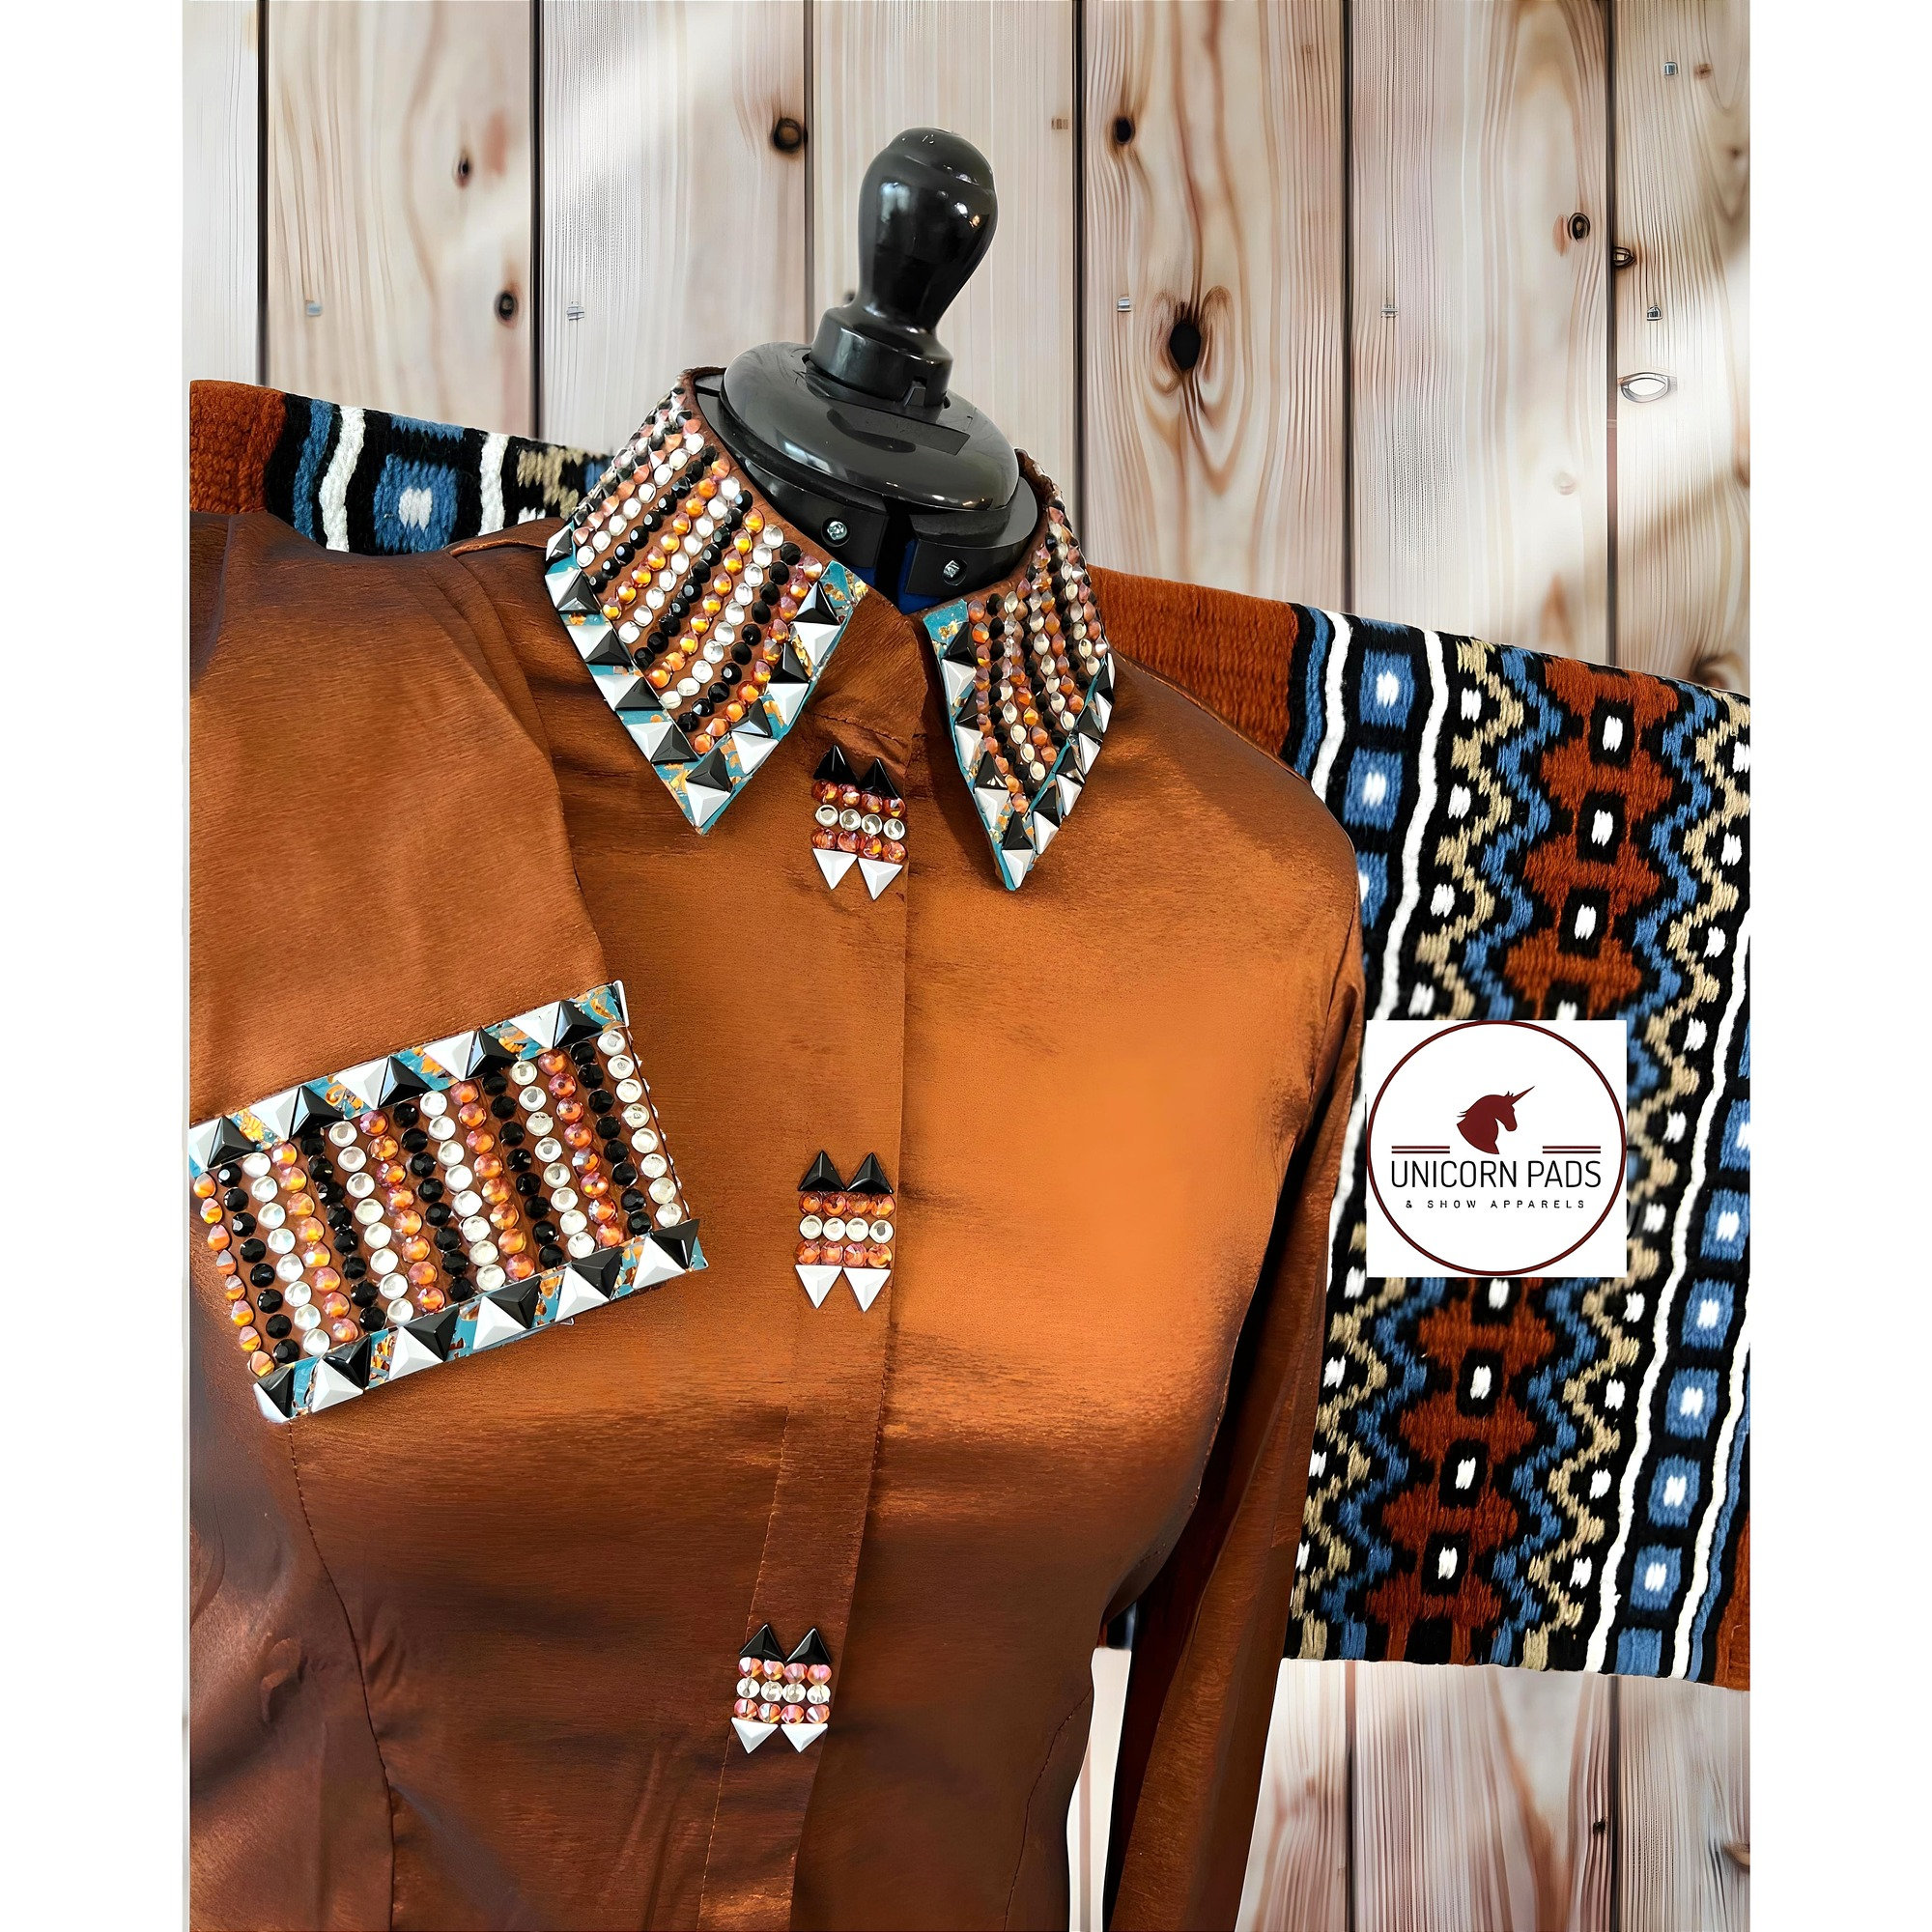 Rust and Blue Show Shirt and Pad Set Western Show Shirt Western Saddle ...